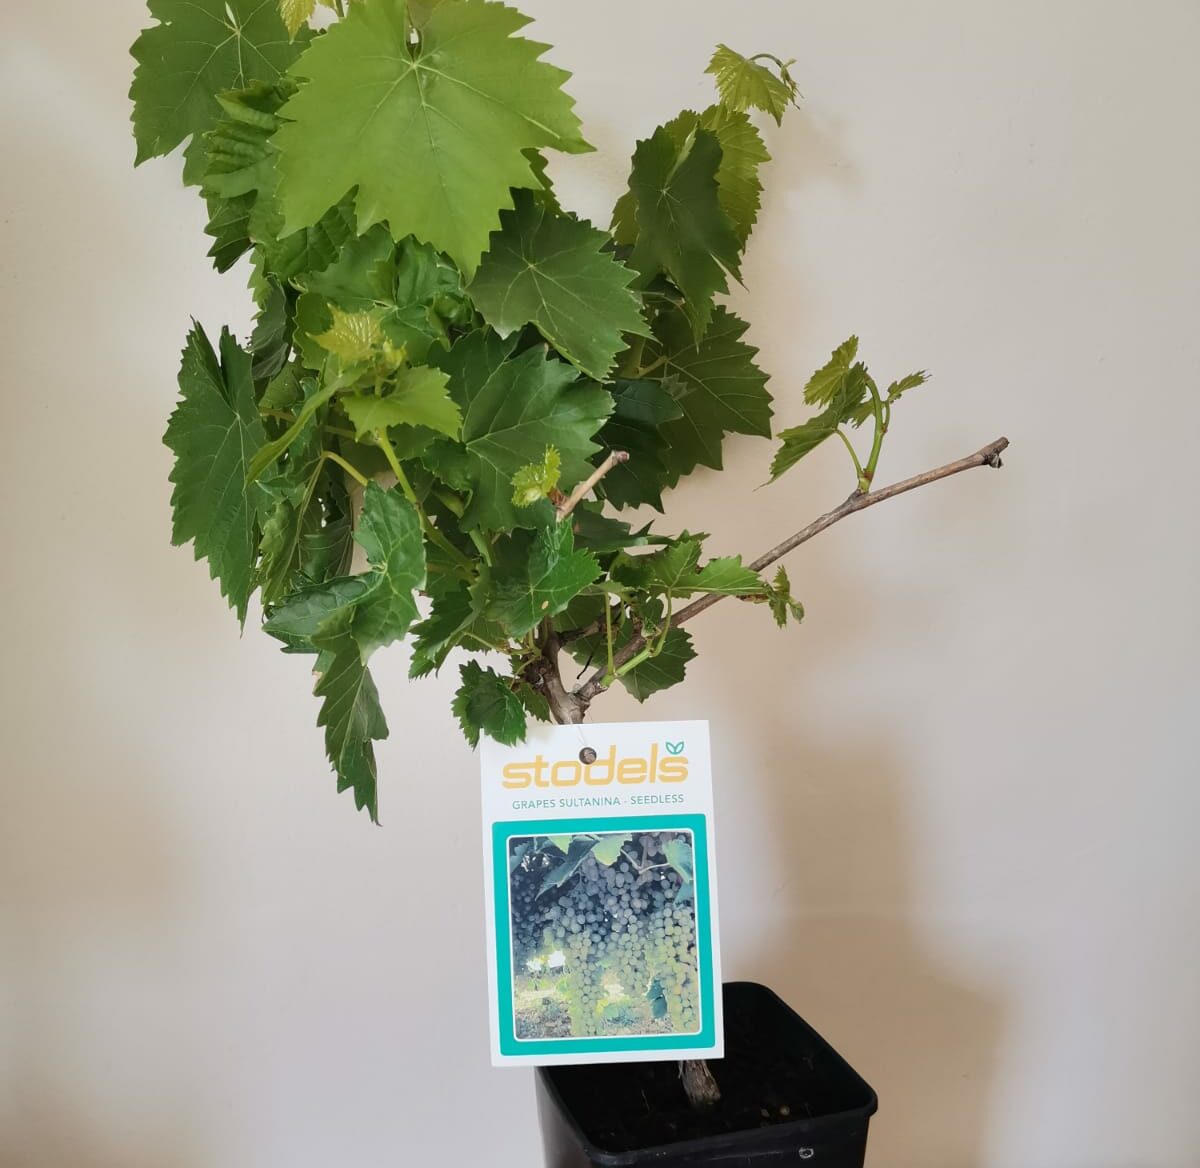 Seedless Sultanina grape plant with large green leaves in a black pot.